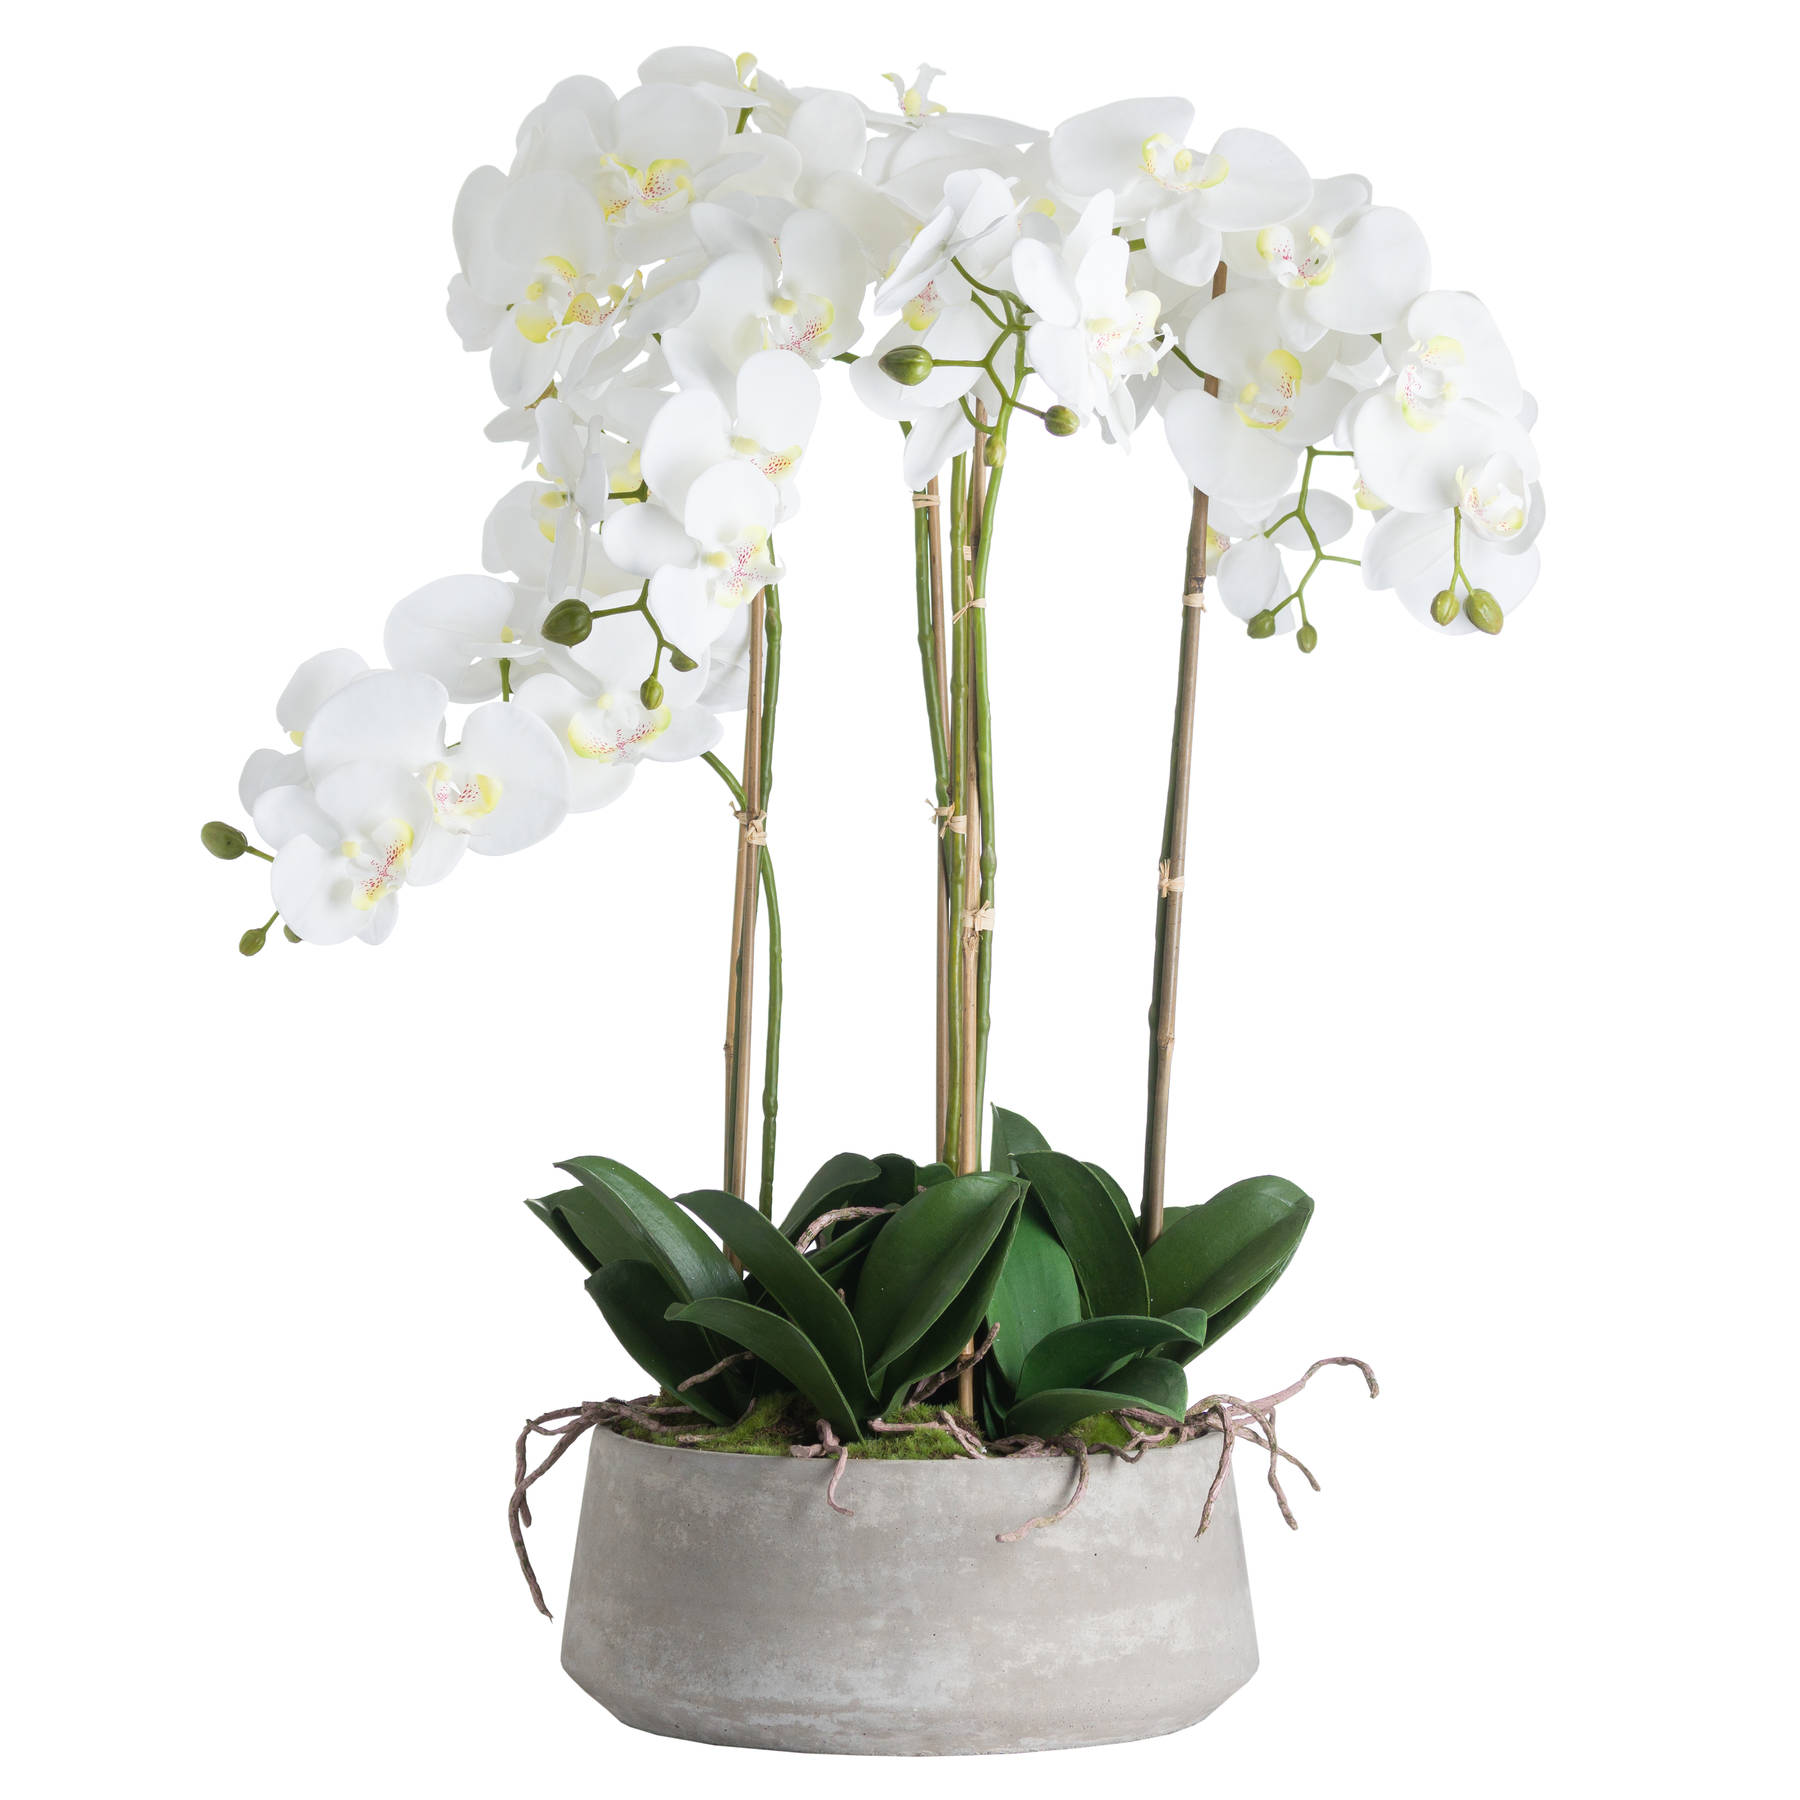 Large White Orchid In Stone Pot - Image 2